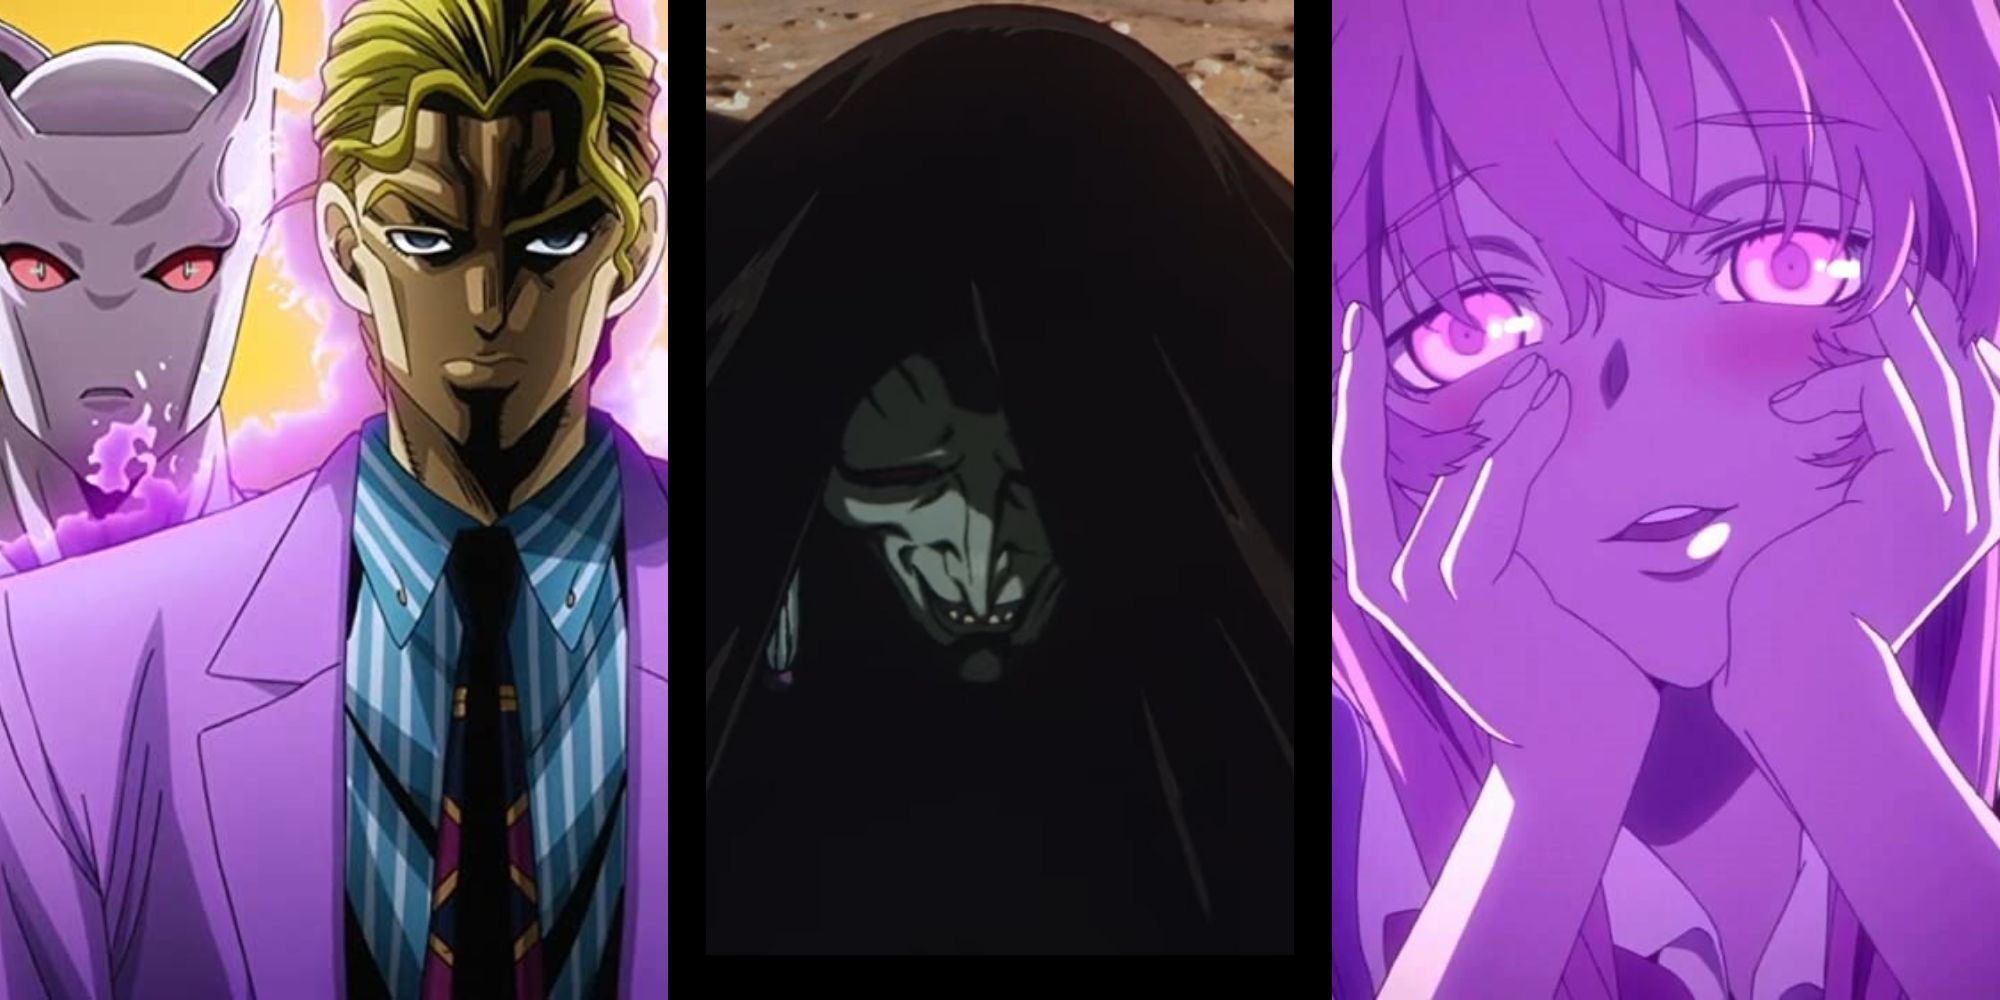 10 Creepiest Anime Characters That Will Give You Nightmares